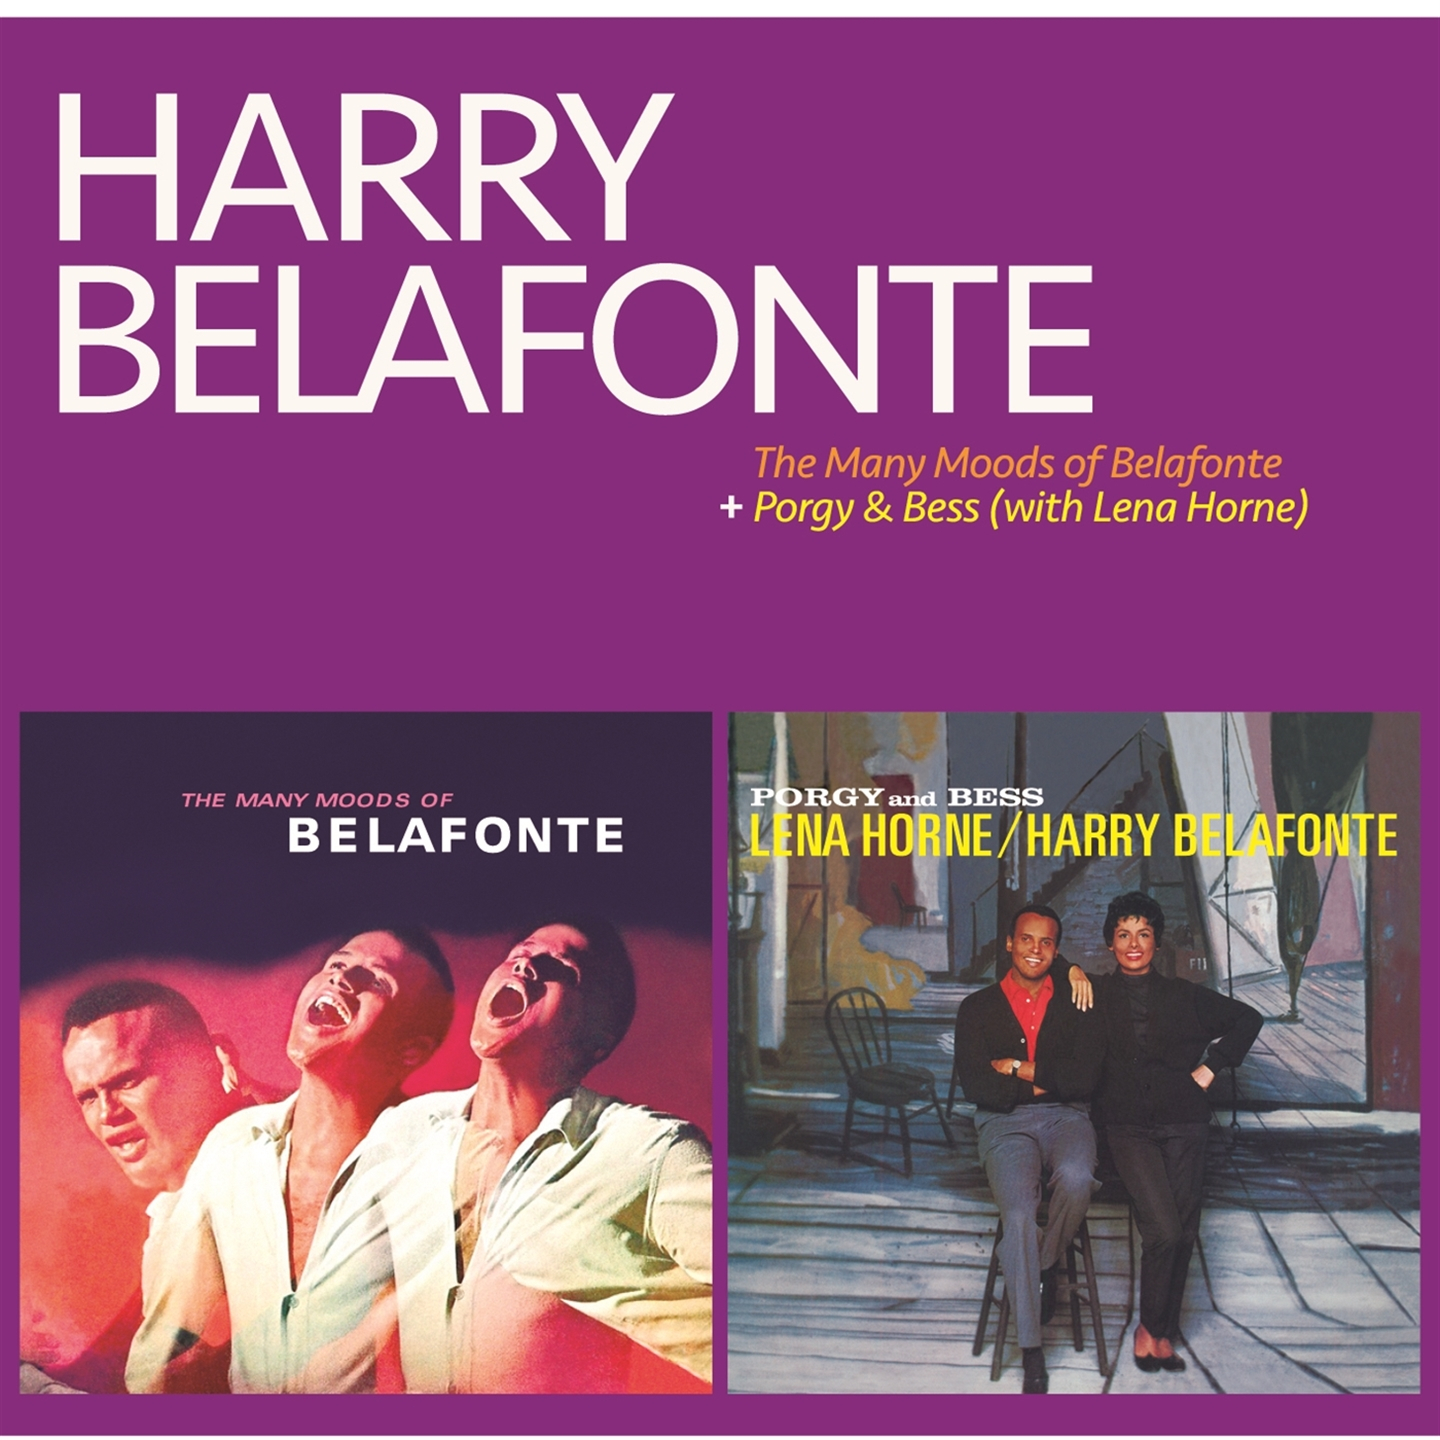 THE MAY MOODS OF BELAFONTE (+ PORGY & BESS)